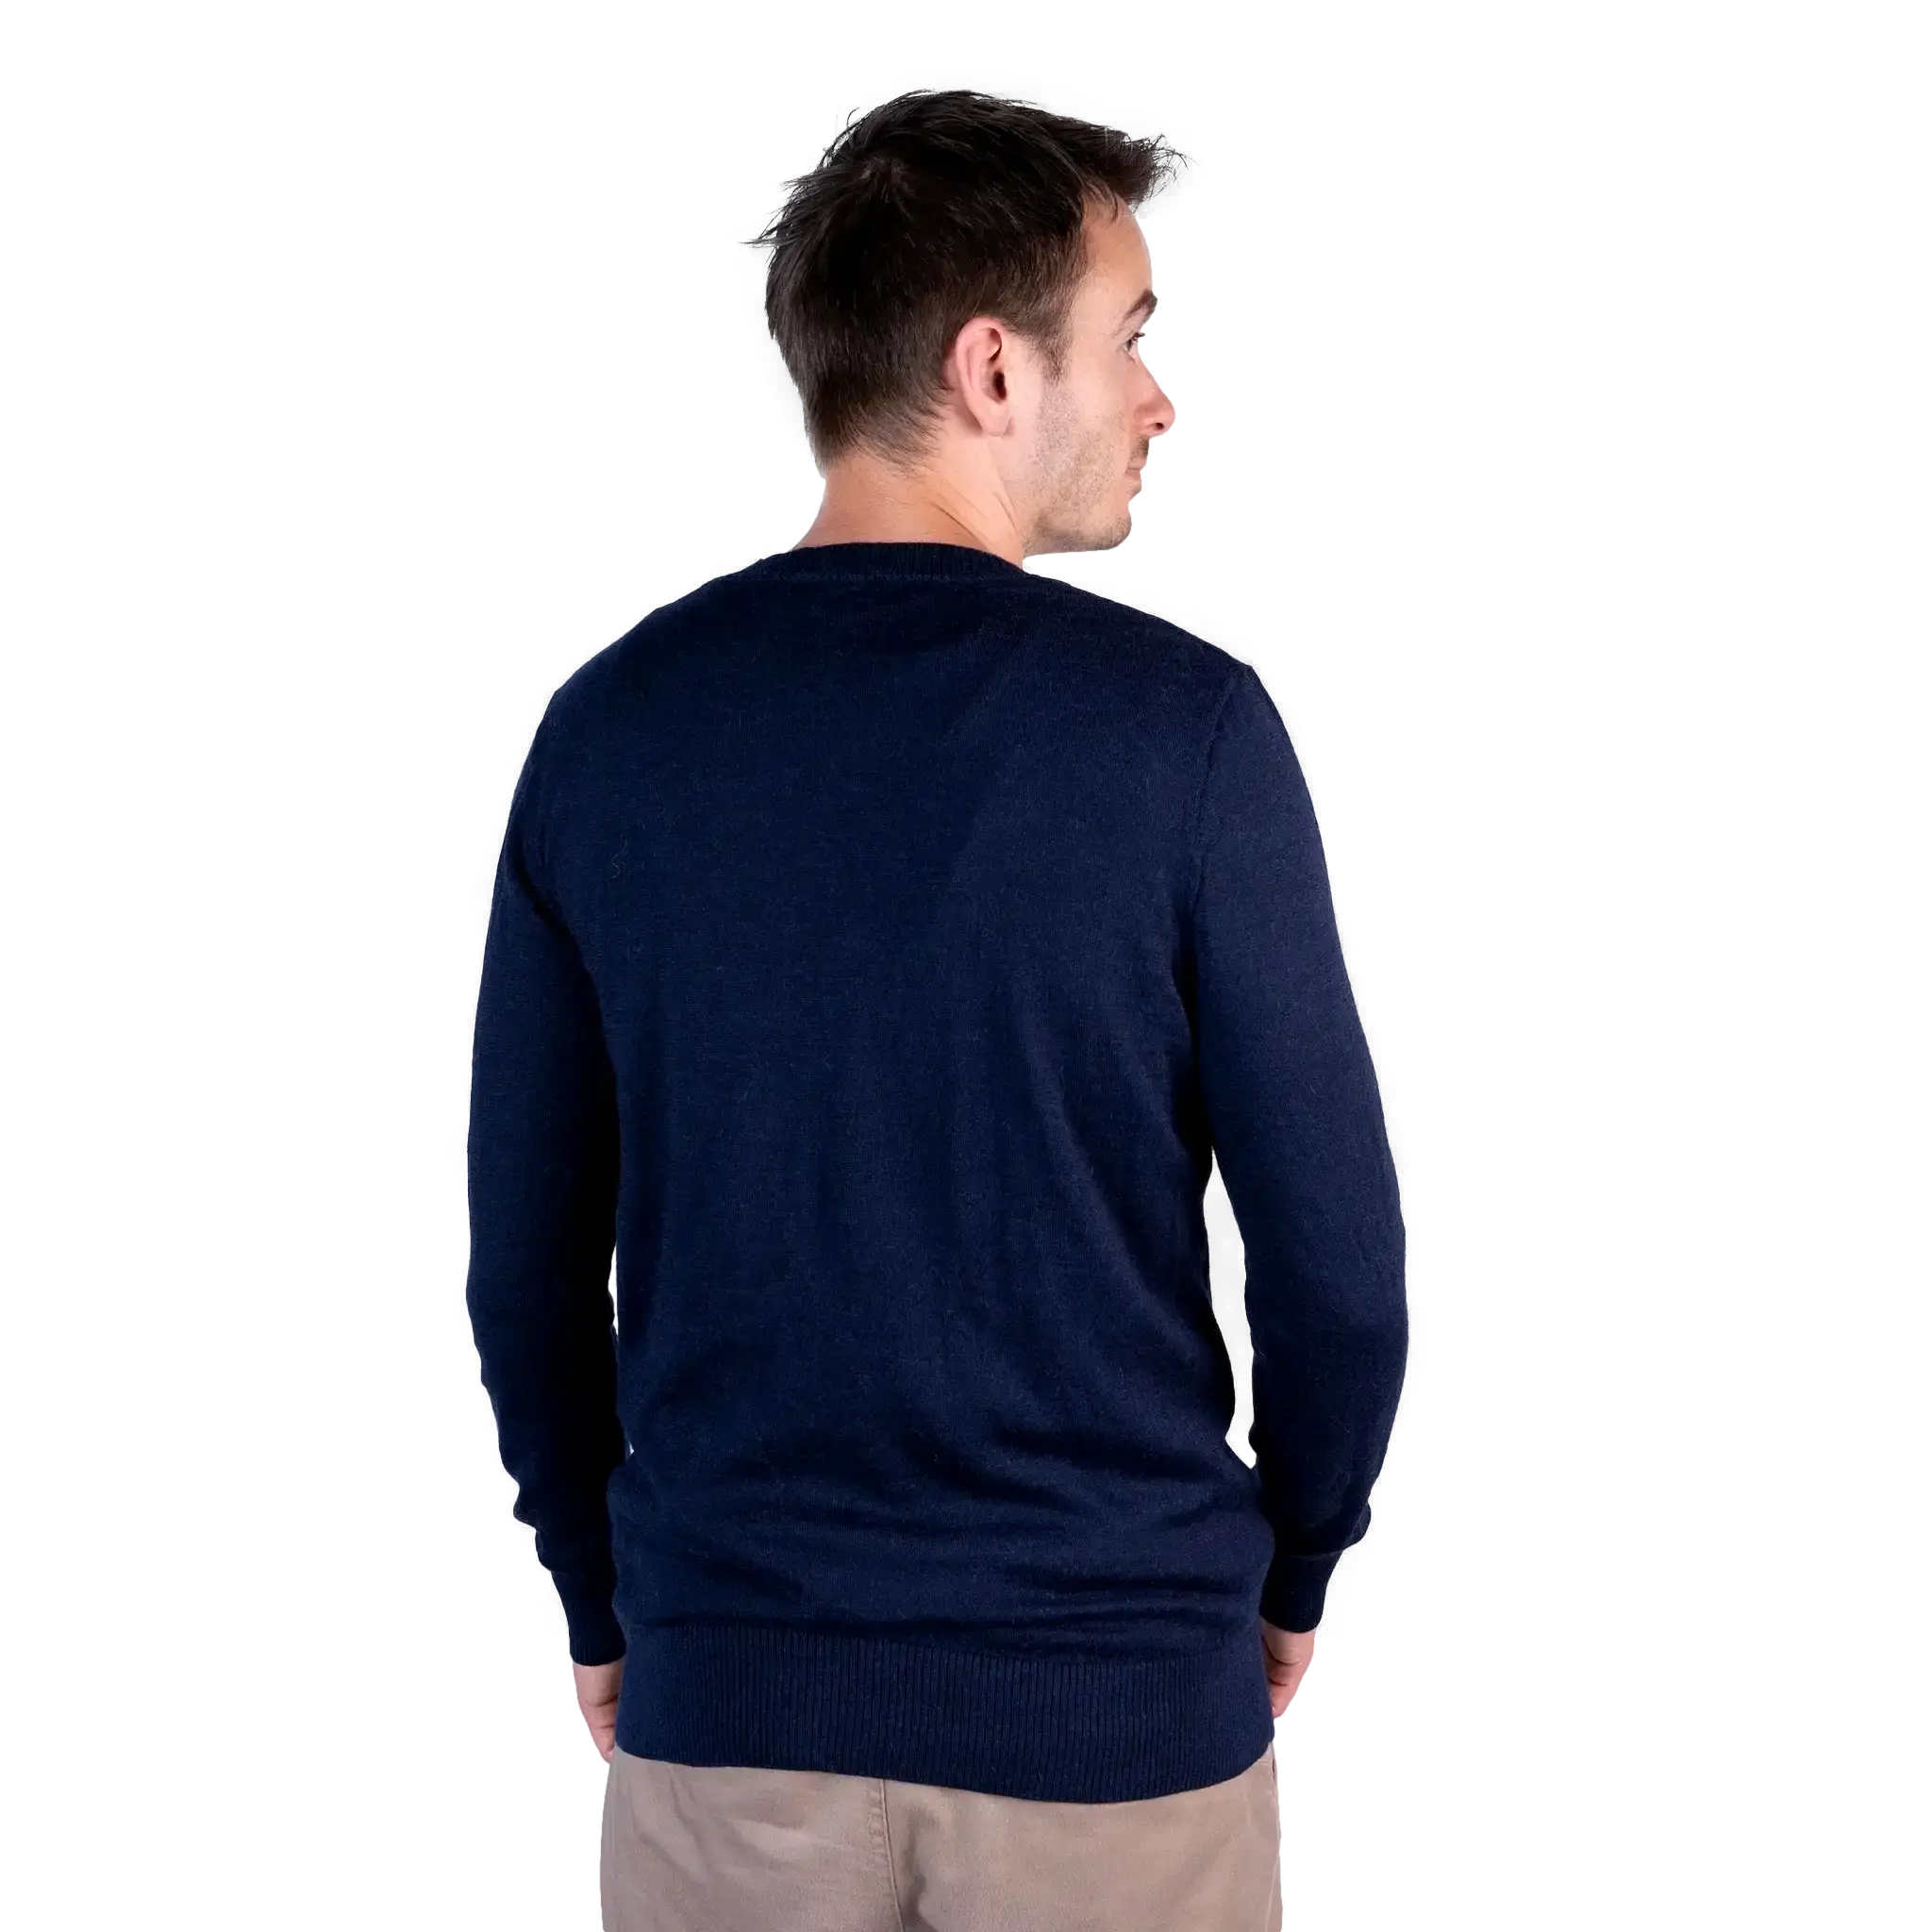 mens-alpaca-wool-sweater-most-comfortable-color-navy-blue-product-page.webp__PID:19af733d-91be-4715-926c-9ea645fc6e8a